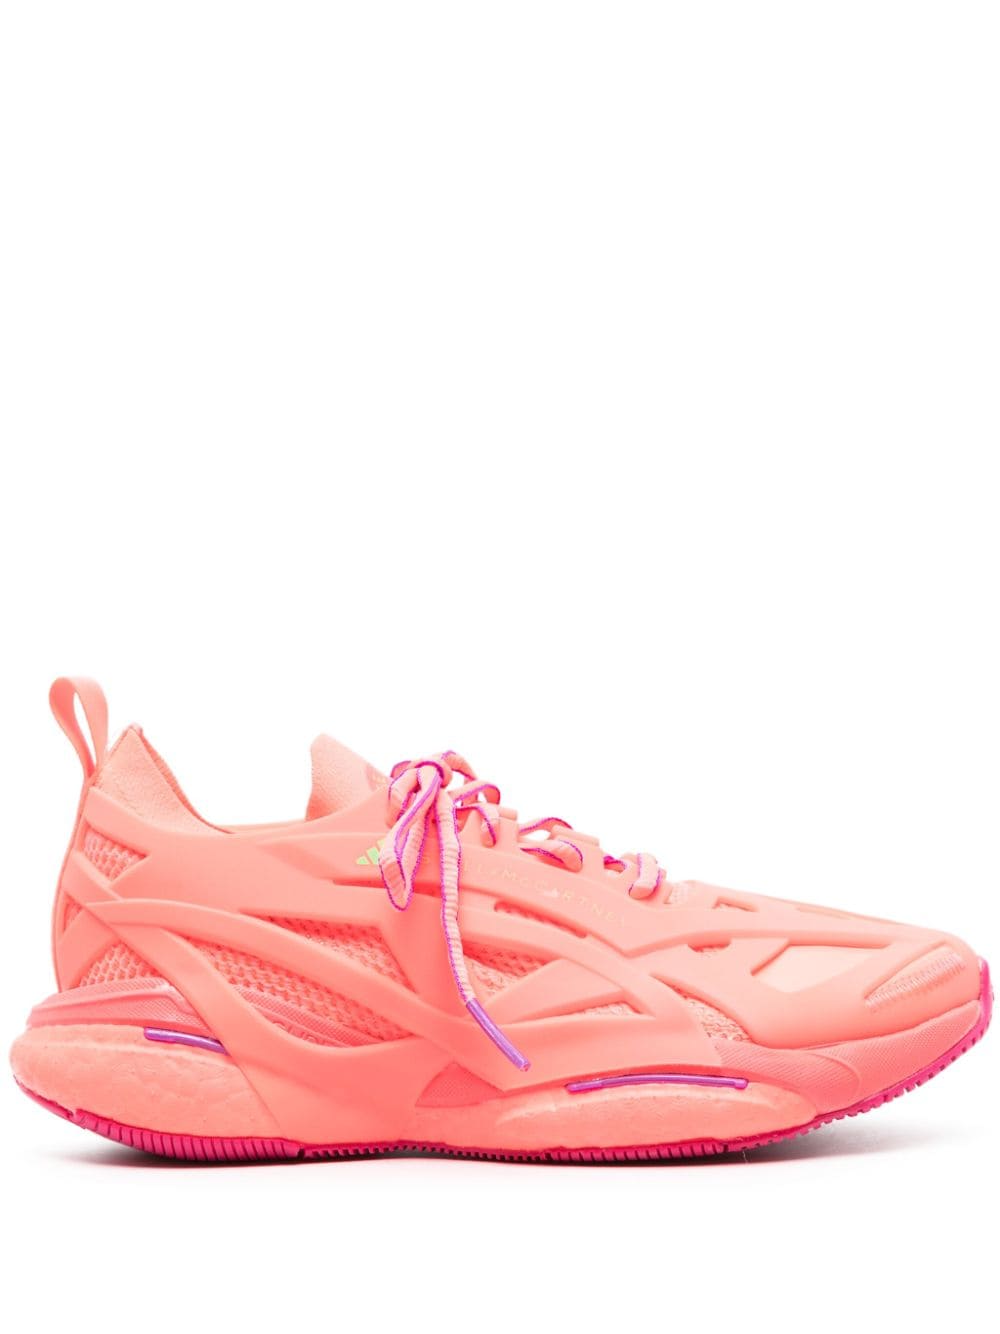 adidas by Stella McCartney Solarglide knitted sneakers - Pink von adidas by Stella McCartney